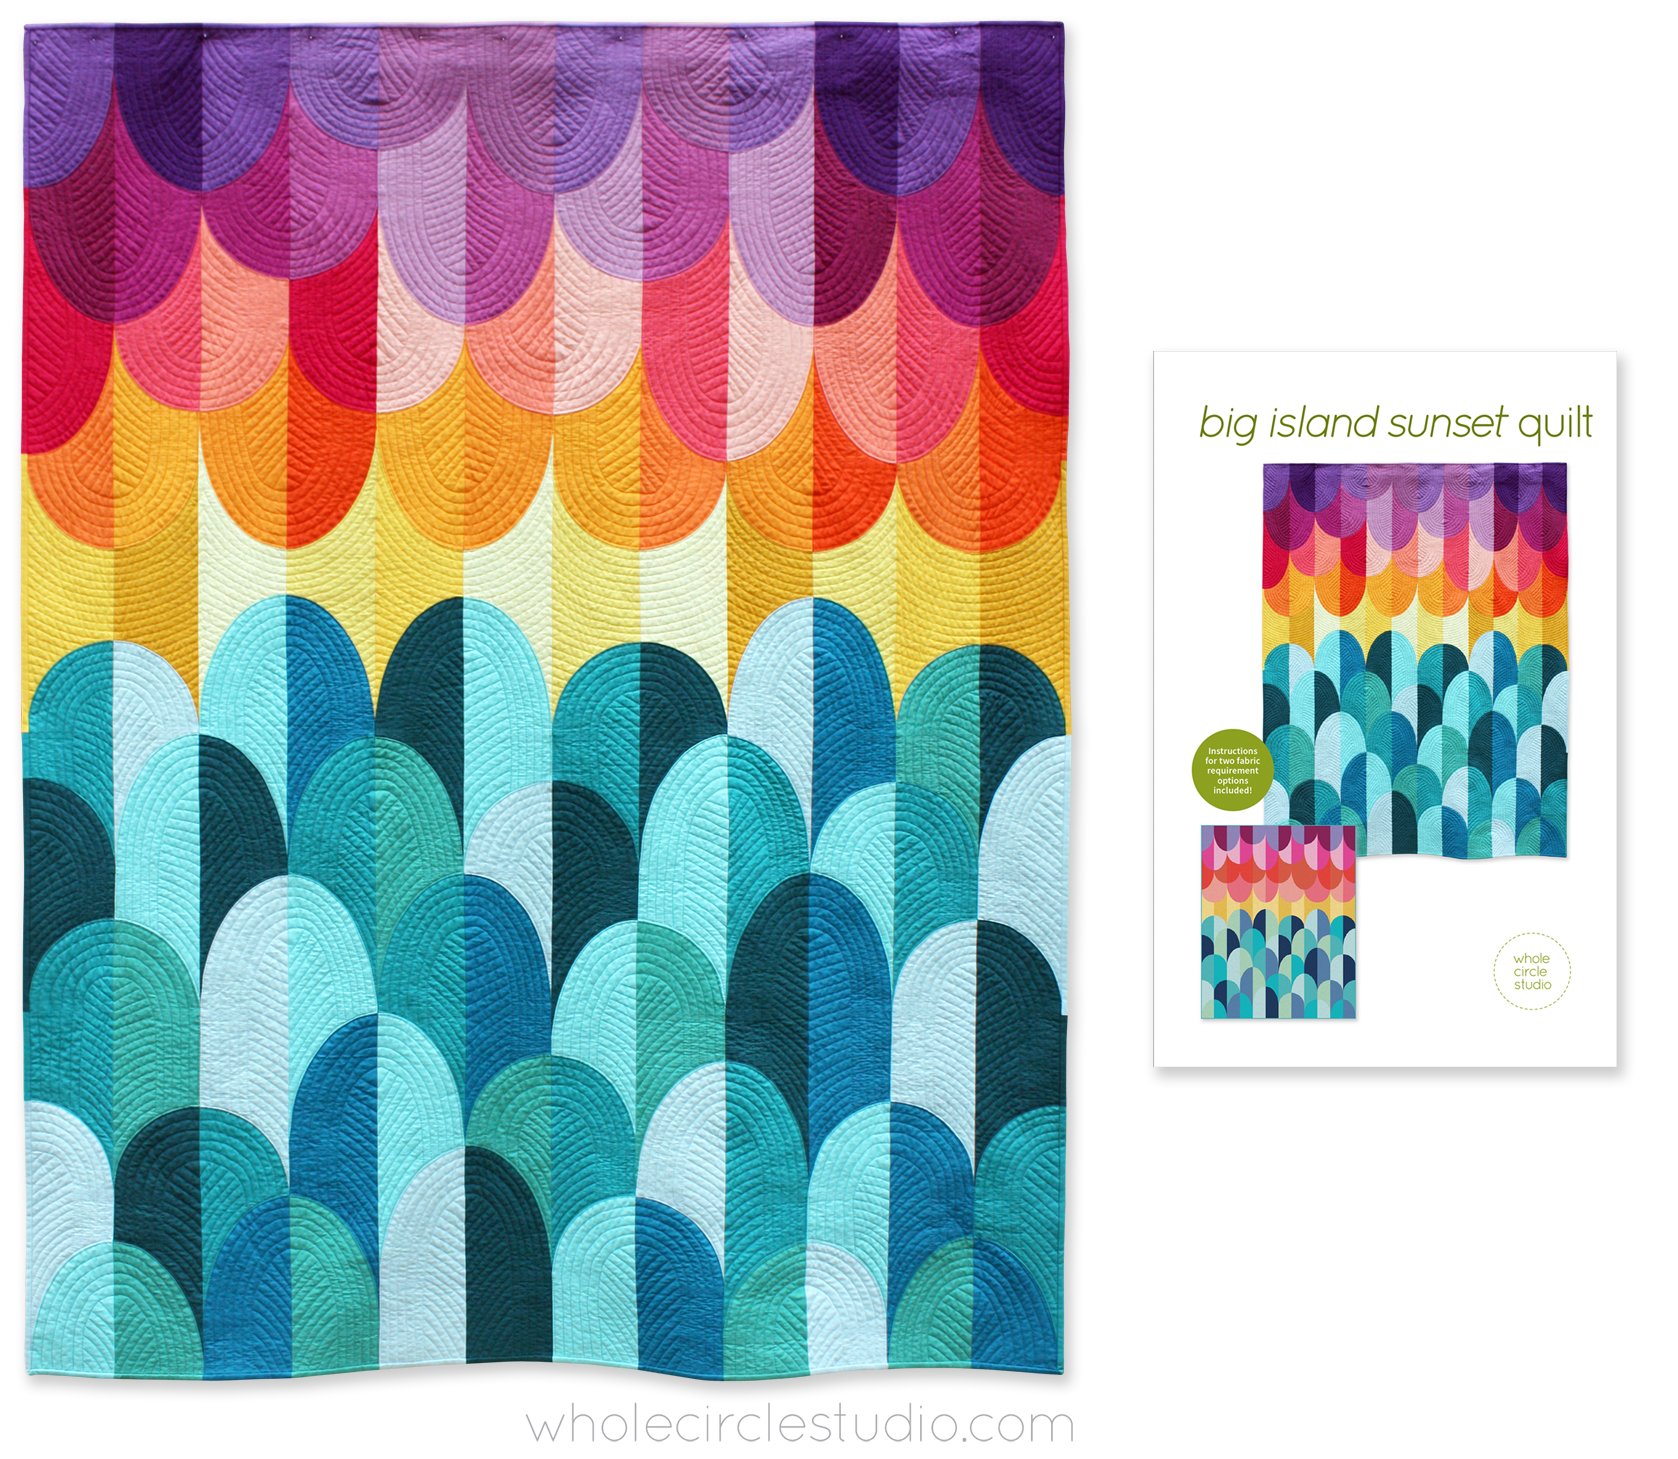 a colorful quilt with curve blocks that resembles a sunset over water waves.